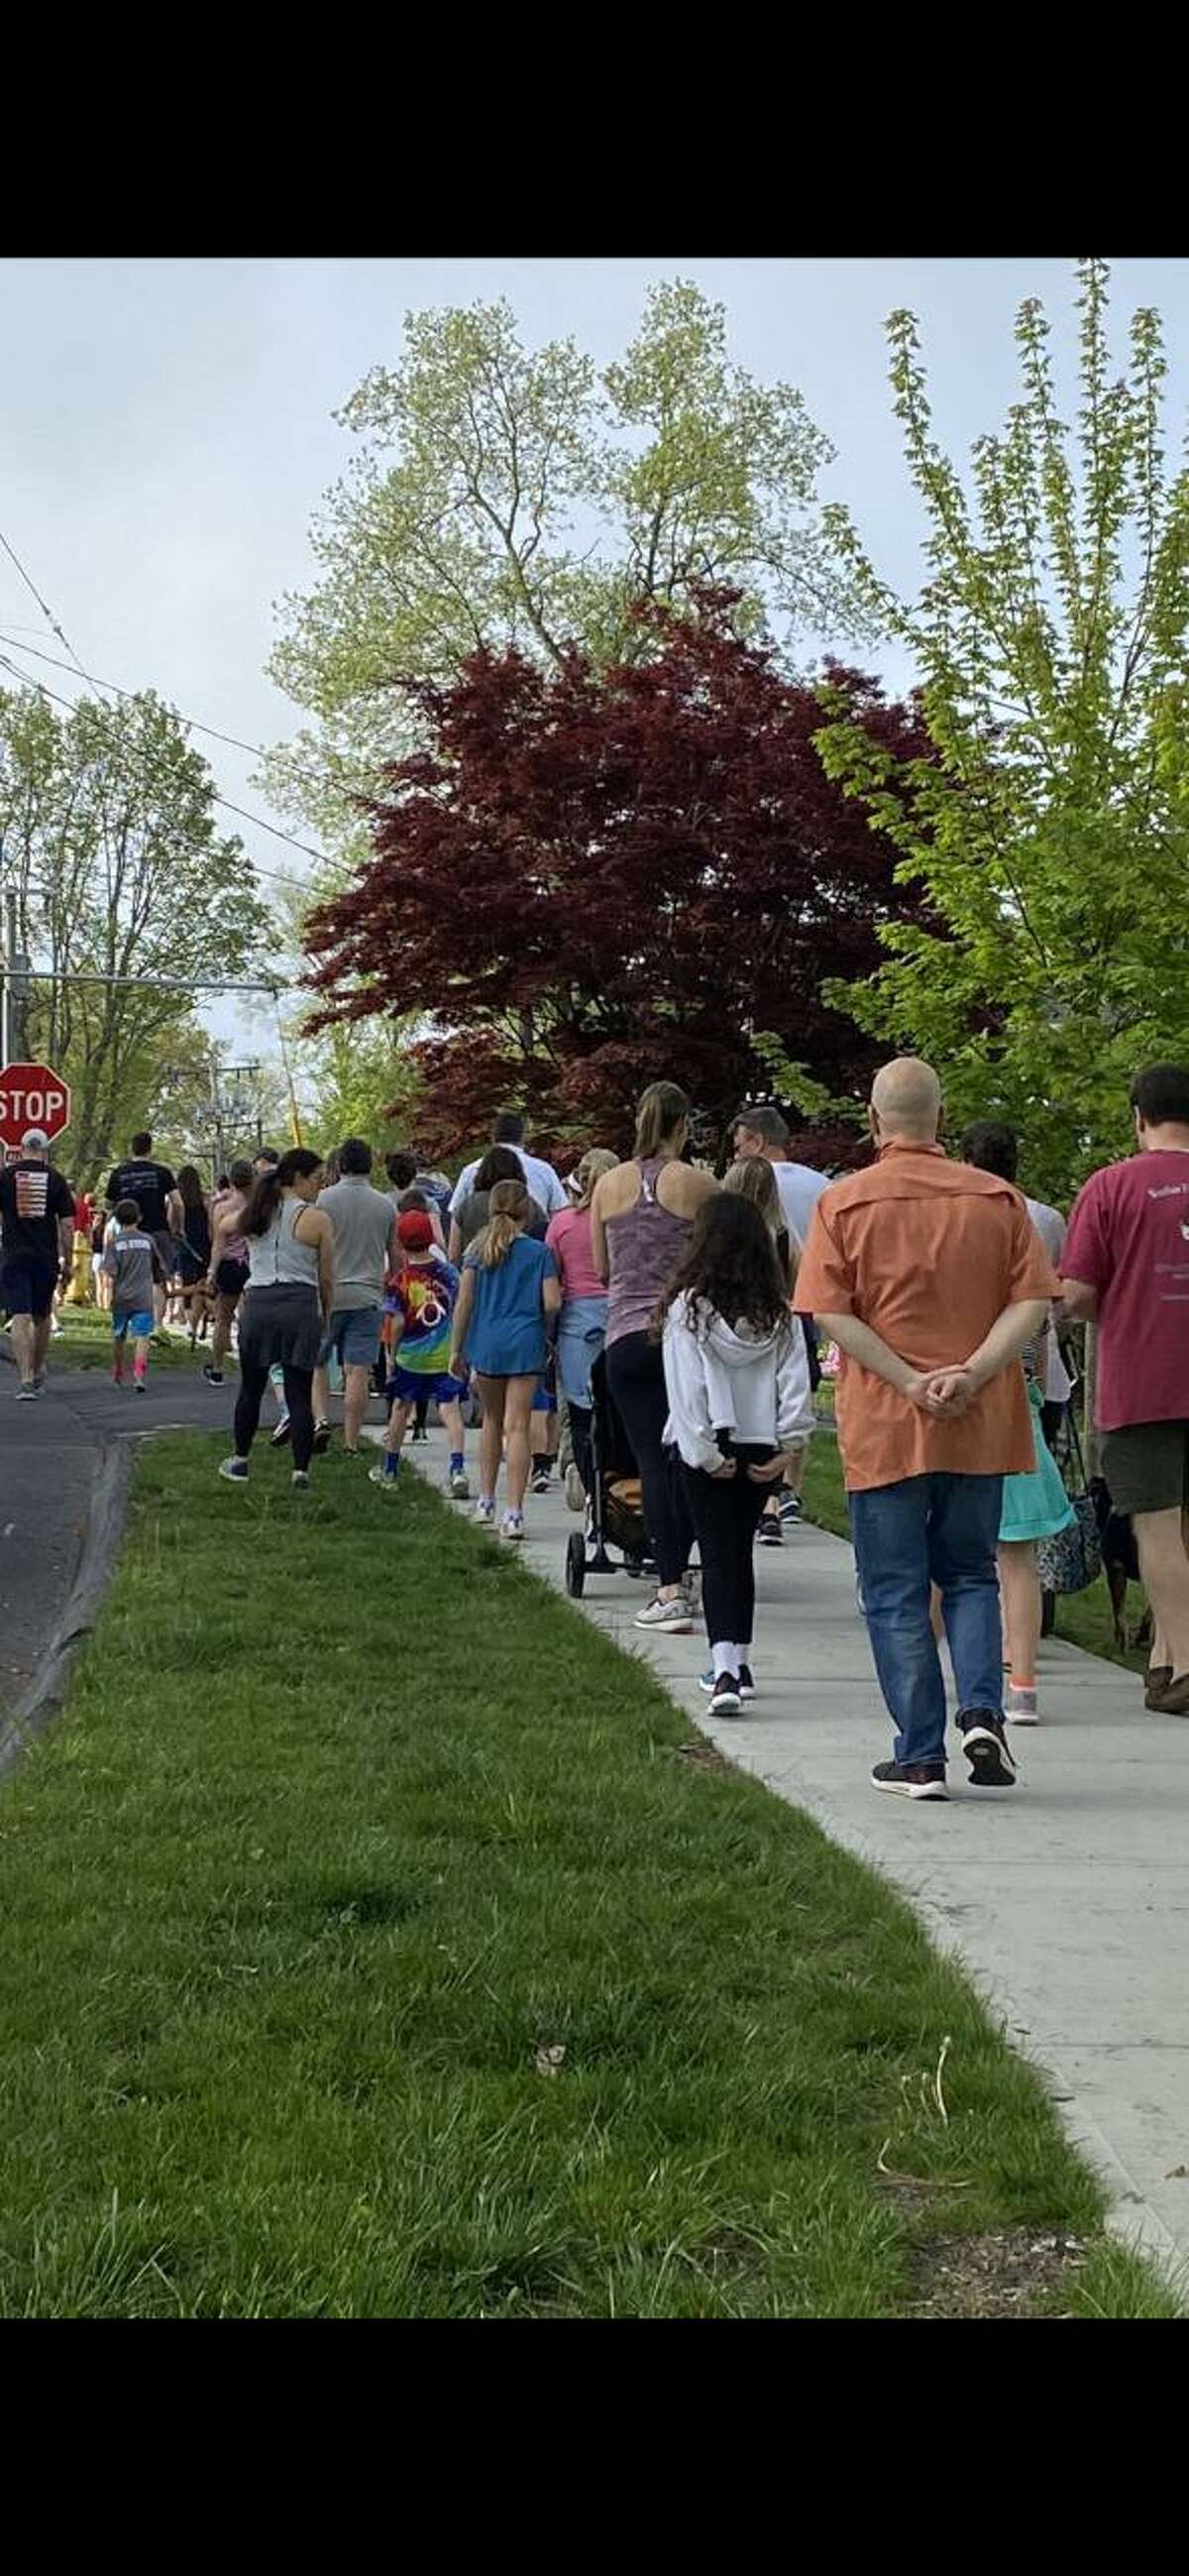 The Scotland Elementary School fifth-grade students organized their fourth and final fundraiser, A Walk to Water, to raise money to build a well in South Sudan.